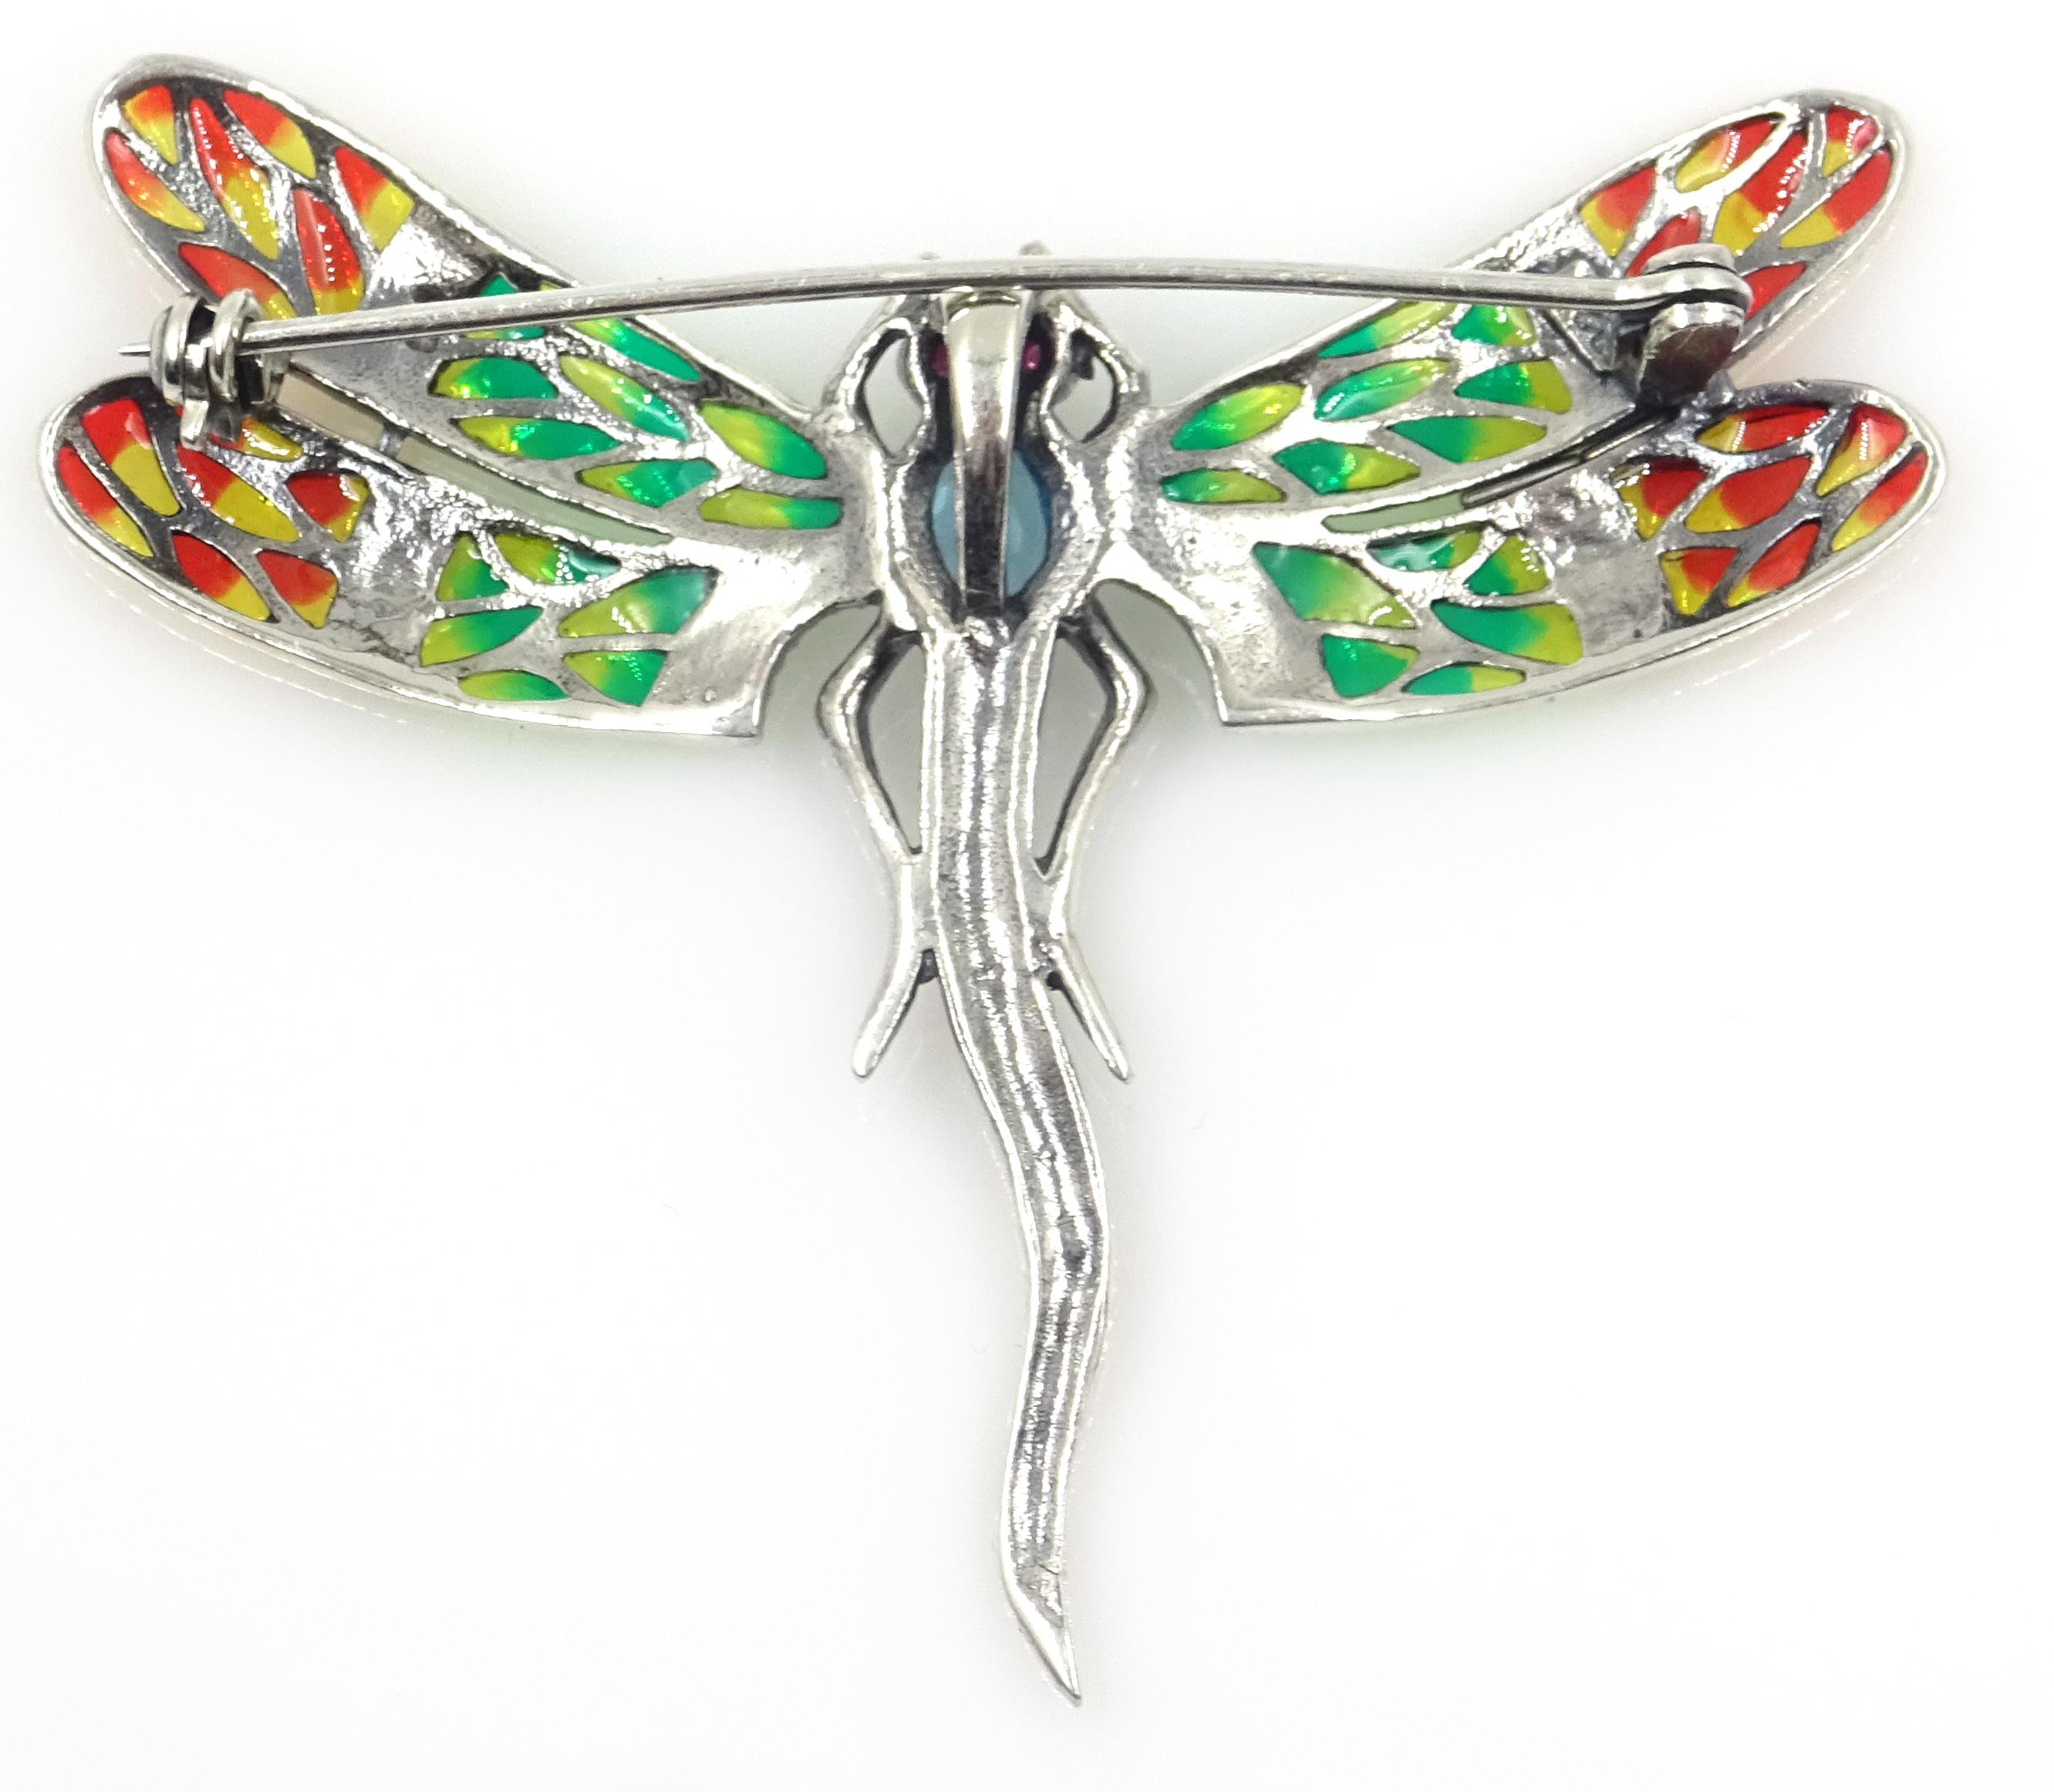 Plique-a-jour, marcasite and stone set dragonfly pendant/brooch, - Image 2 of 3